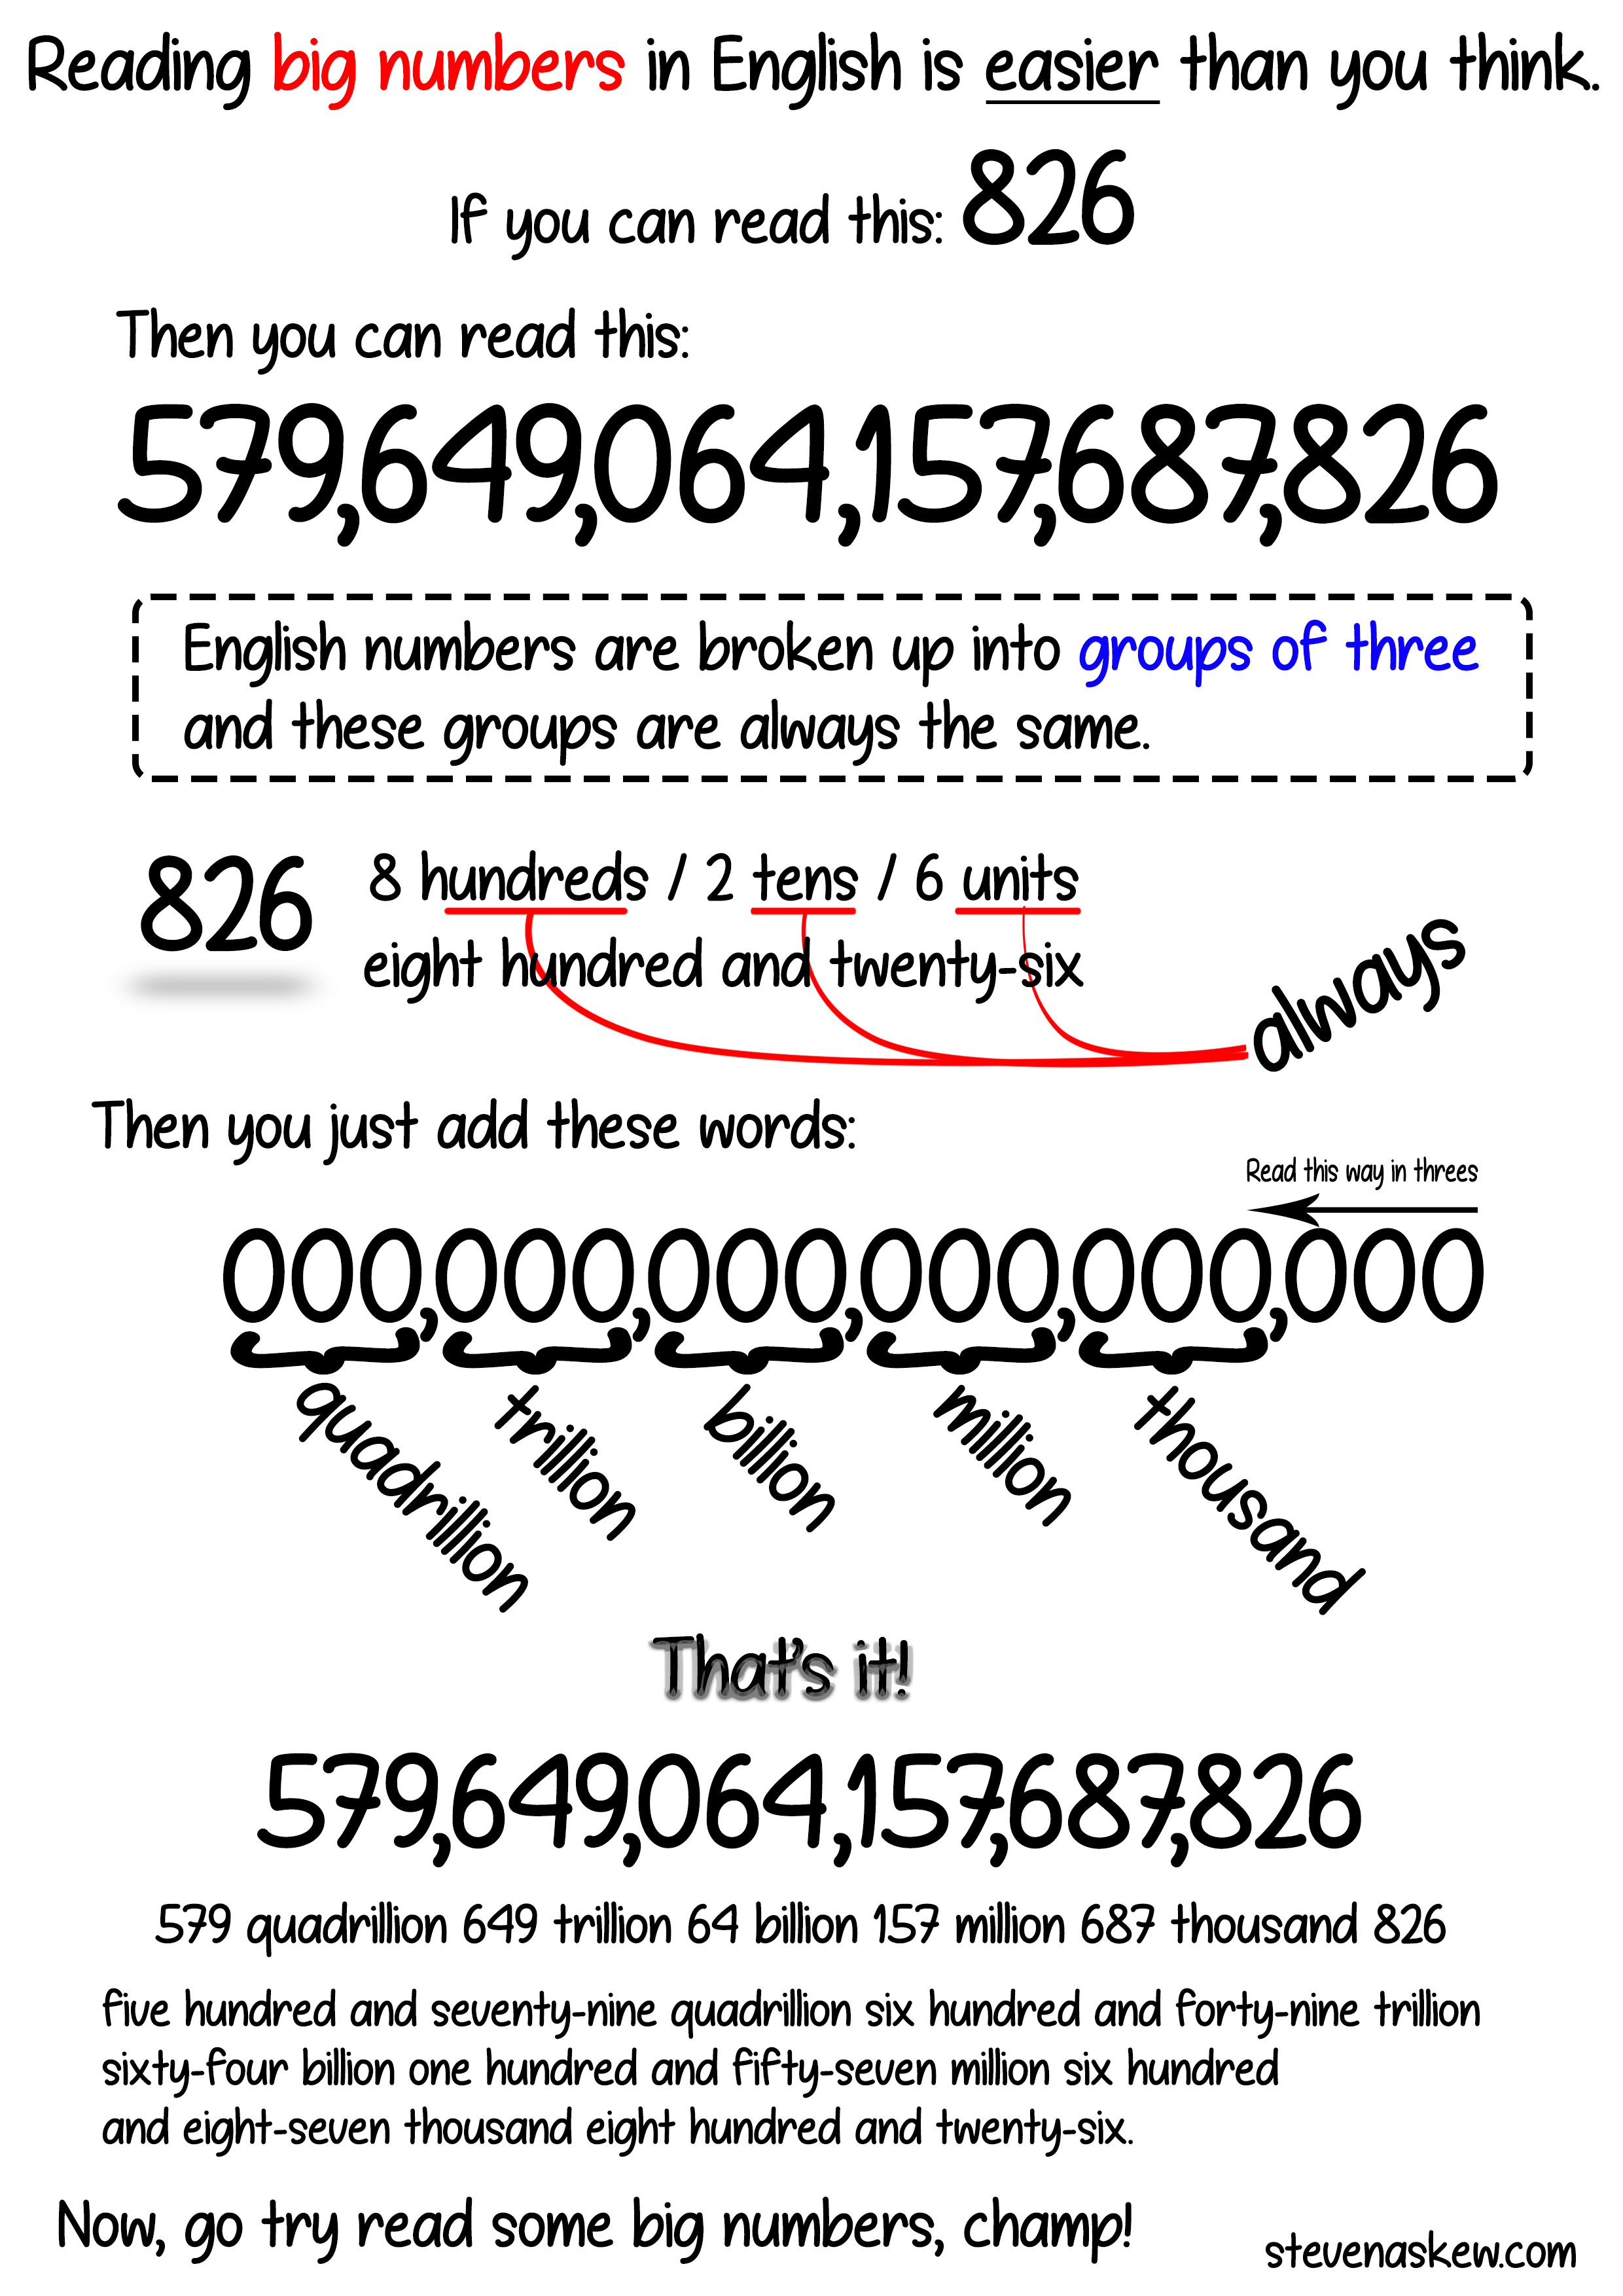 how-to-read-big-numbers-steven-askew